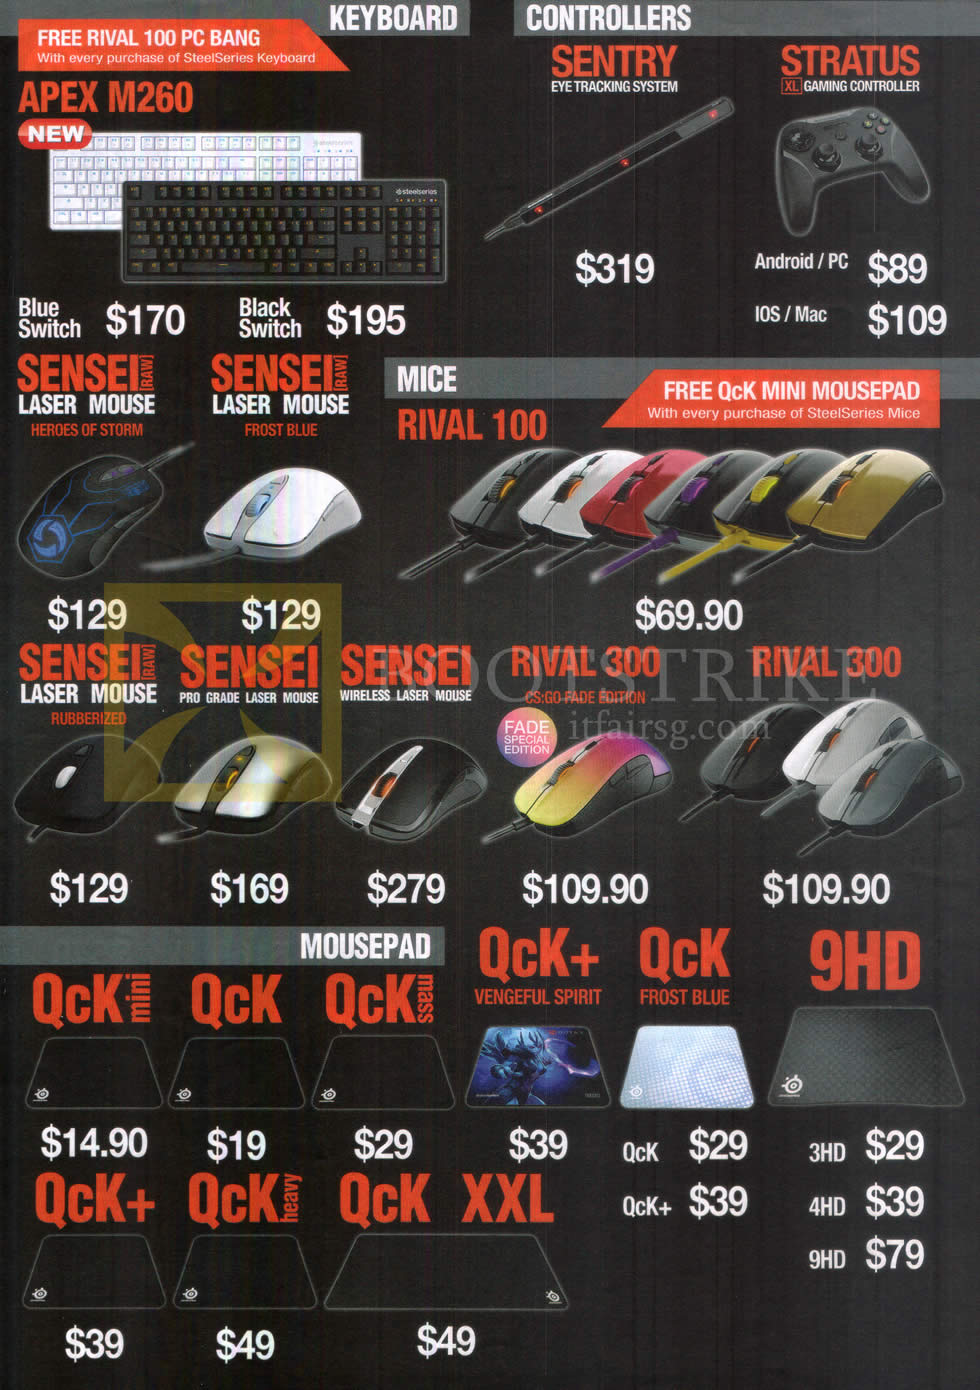 IT SHOW 2016 price list image brochure of Steelseries Mouse, Keyboard, Eye Tracking System, Gaming Controller, Mousepad, QCK, Mini, Mass, Frost Blue, 9HD, Sensei Raw Laser Mouse, Rival 100